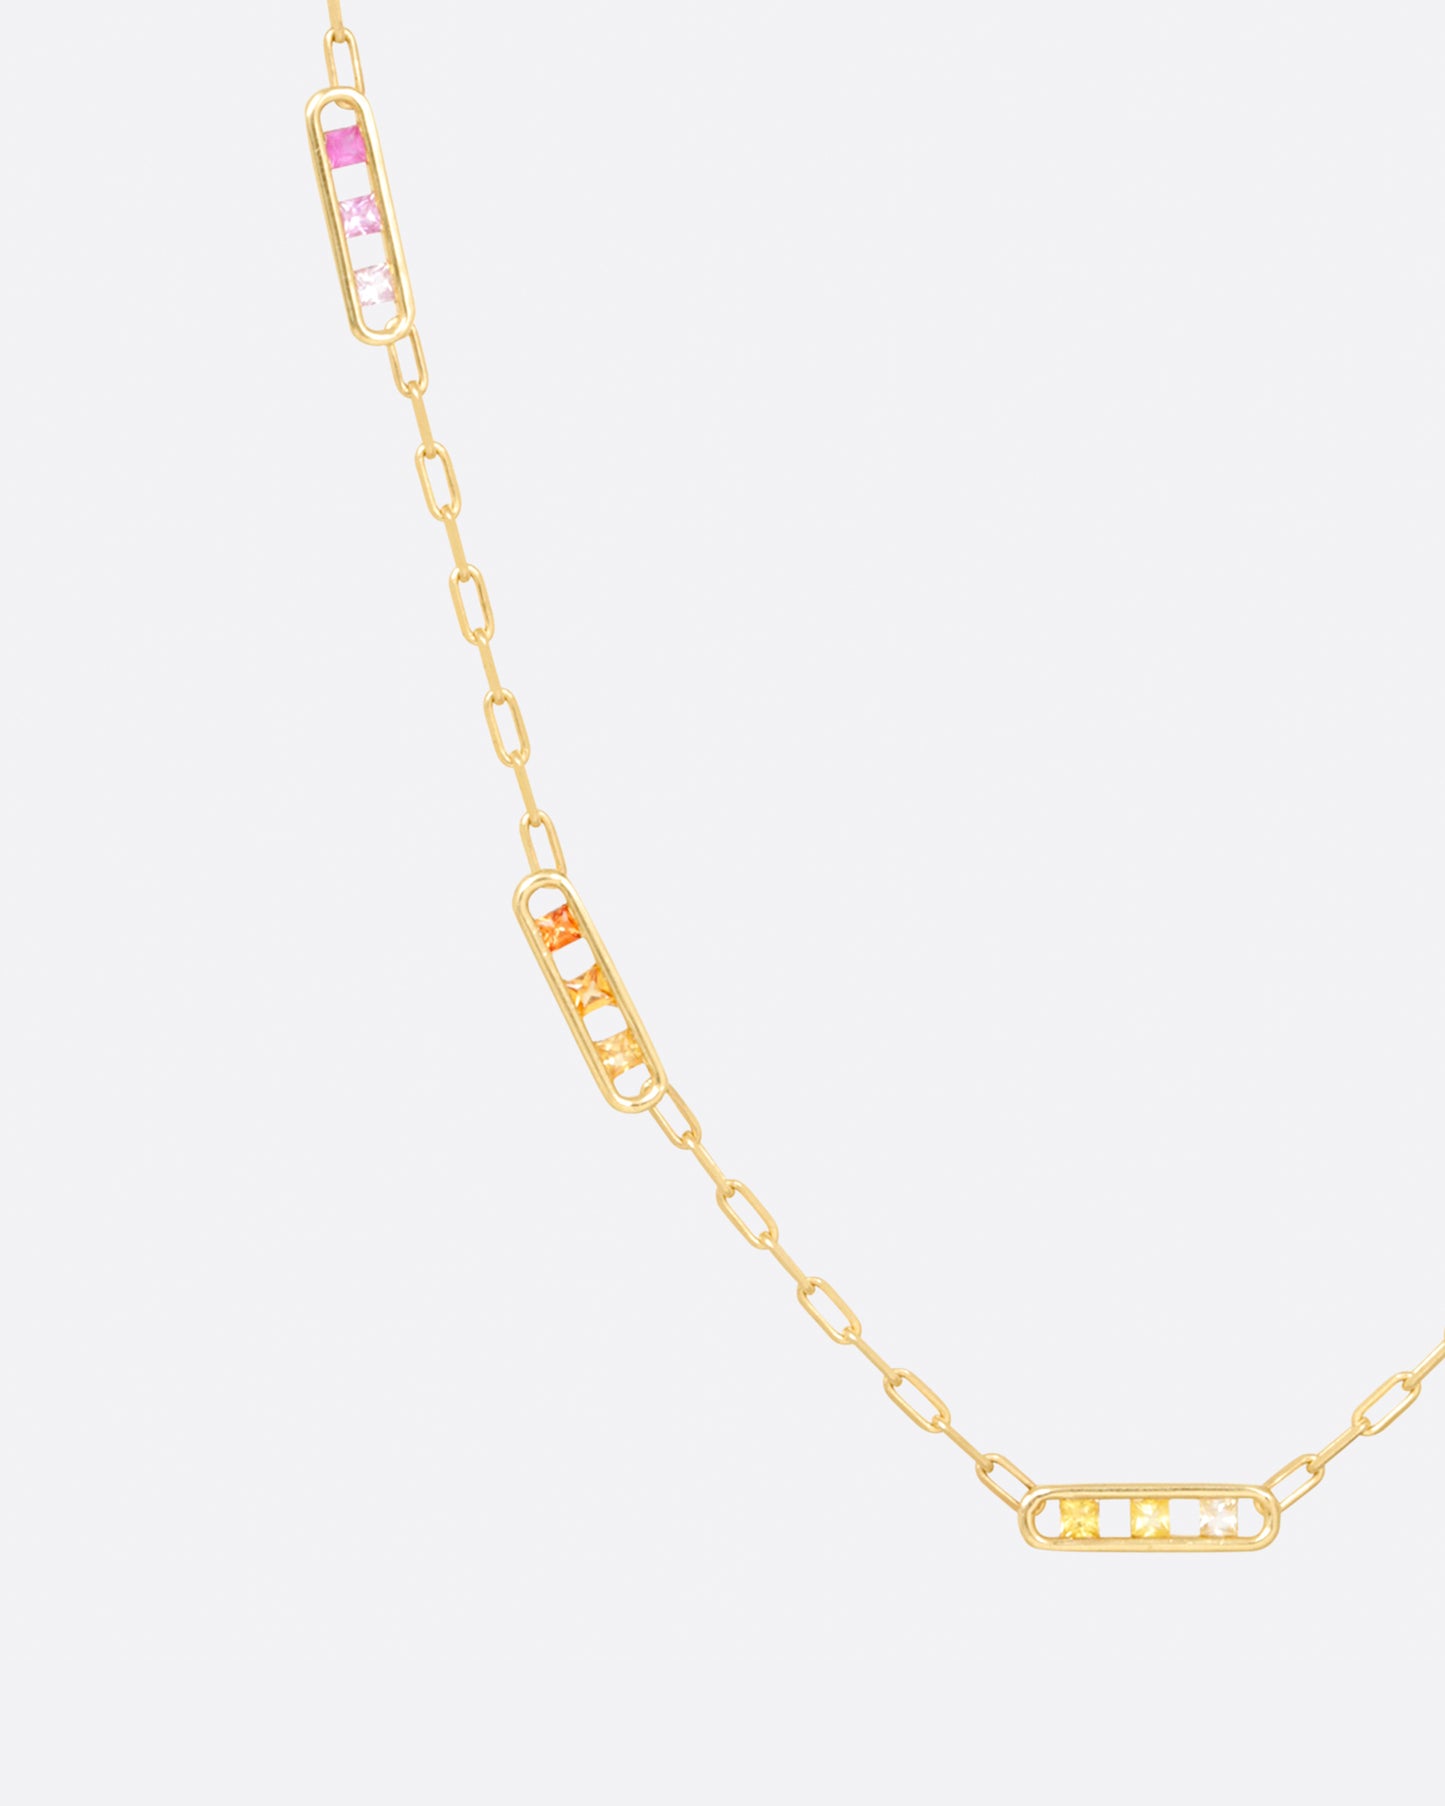 A yellow gold chain necklace with five stations containing princess cut rainbow sapphires, shown hanging on the left.